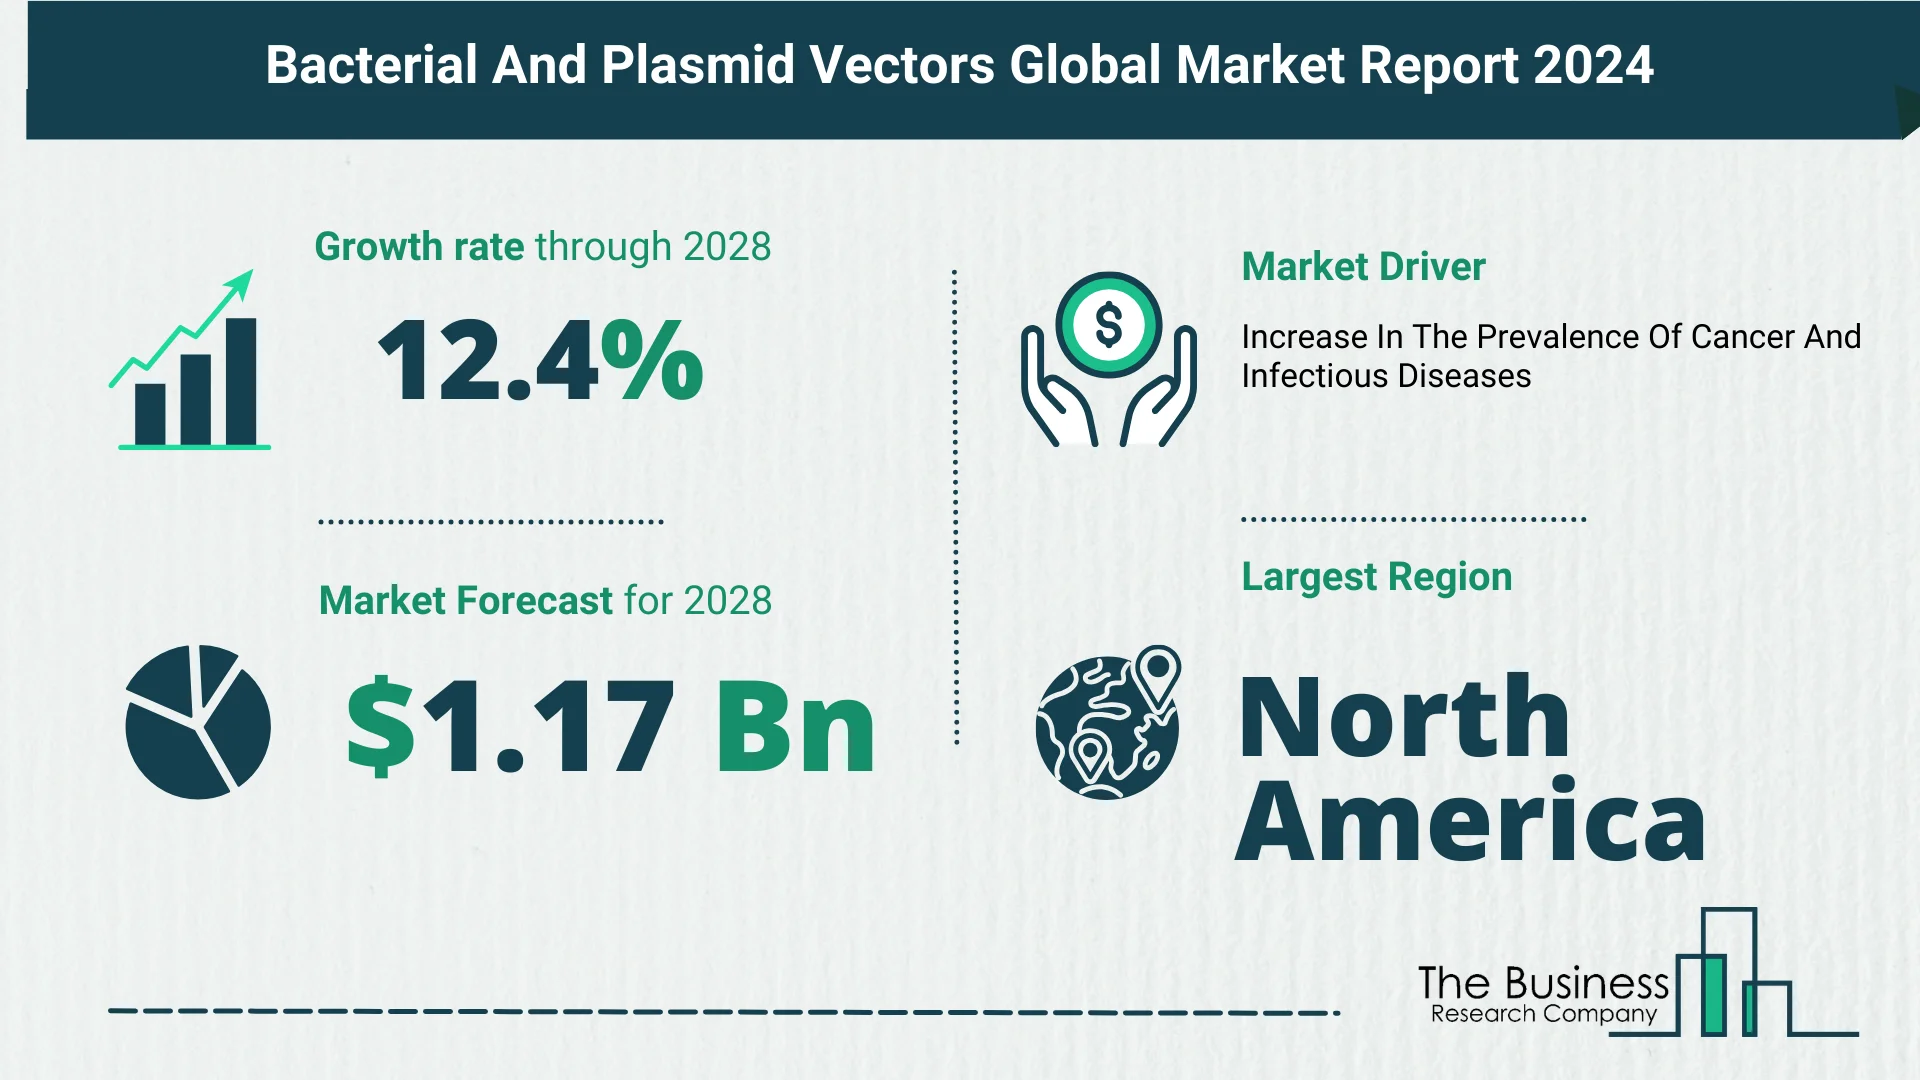 Global Bacterial And Plasmid Vectors Market Overview 2024: Size, Drivers, And Trends | Sigma-Aldrich Inc., ATUM, QIAGEN N.V., Promega Corporation, Thermo Fisher Scientific Inc.